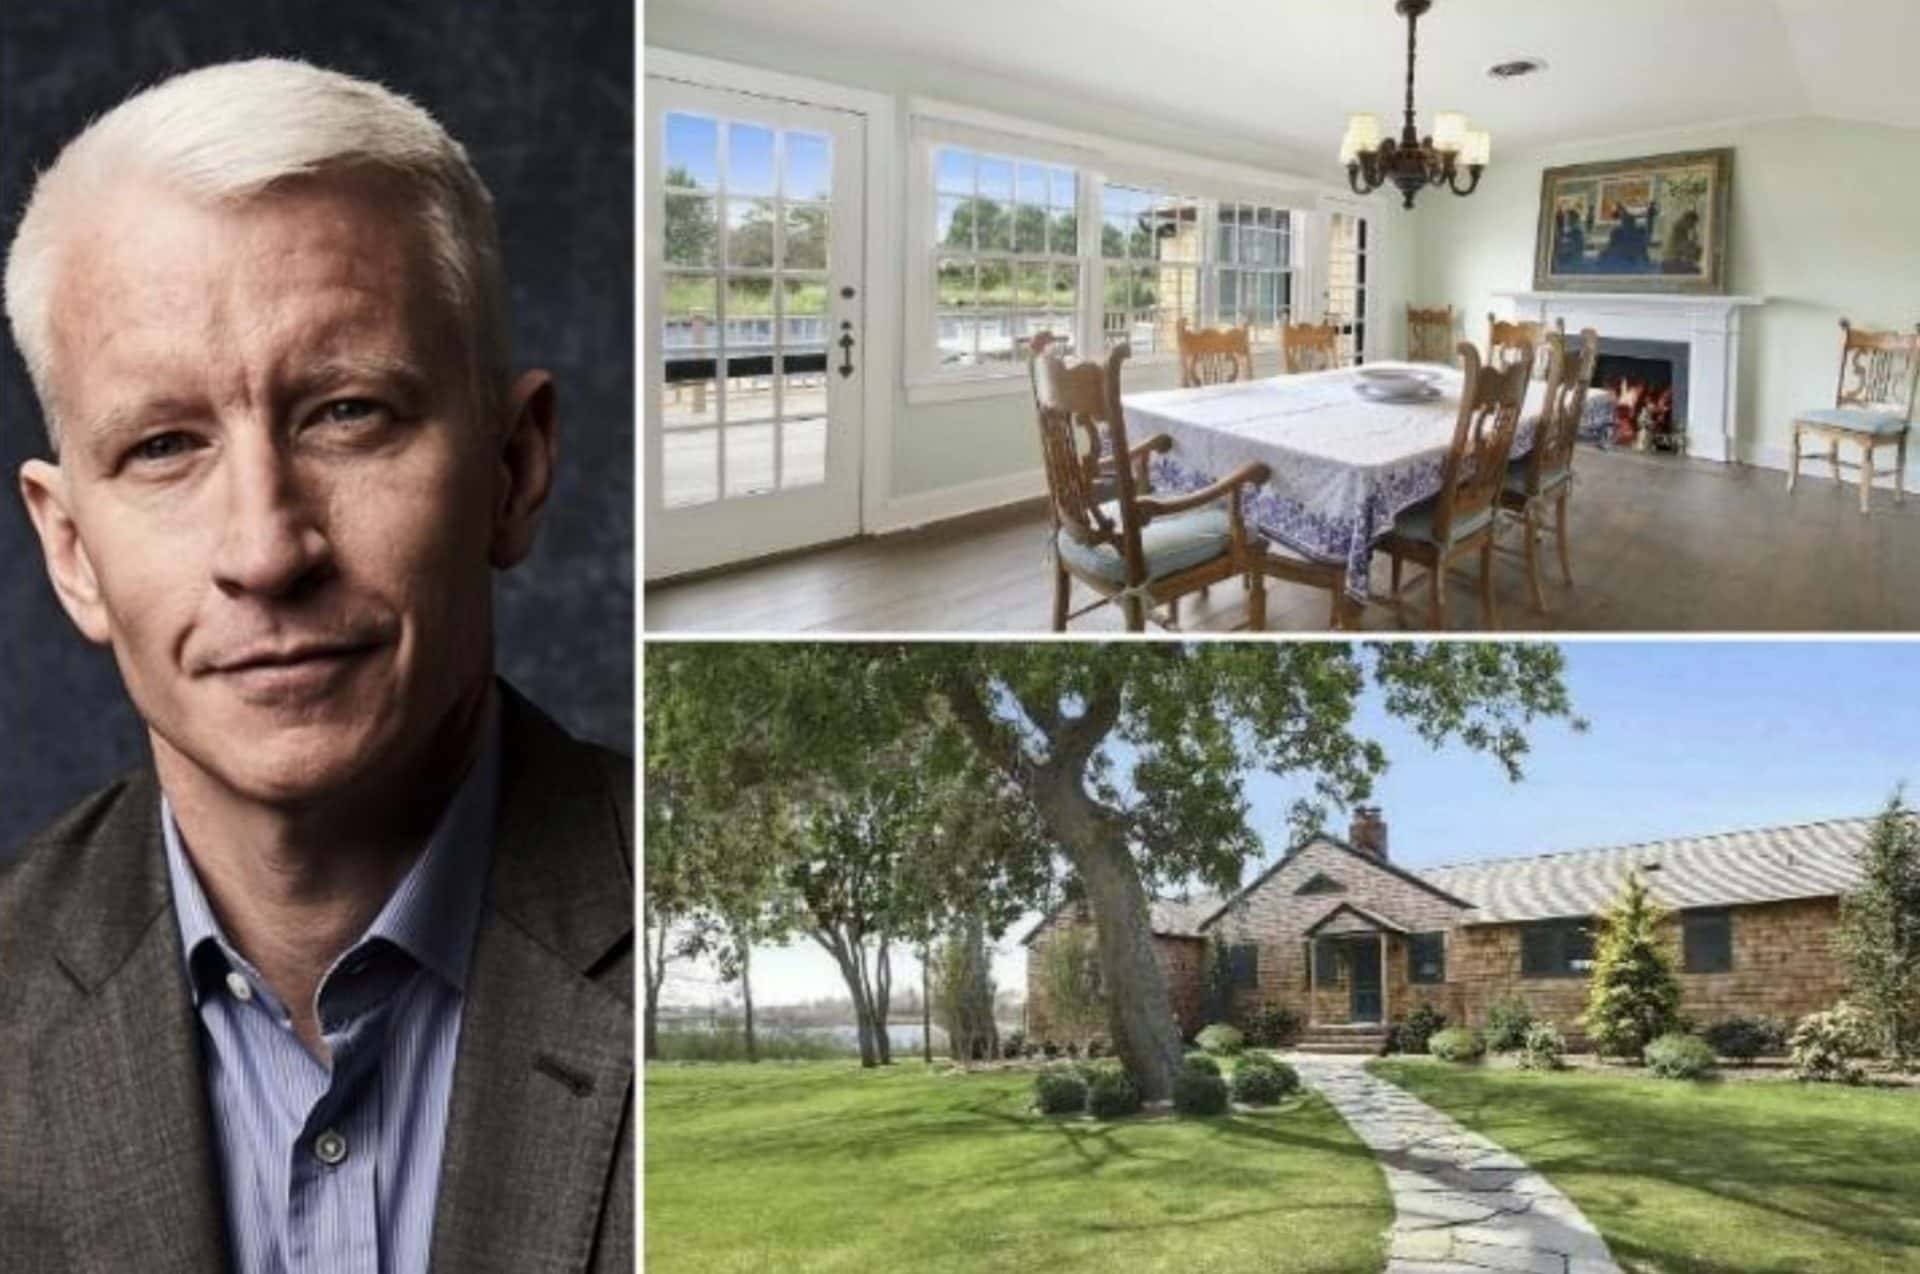 Anderson Cooper’s Home In The Hamptons ($3.1 million)